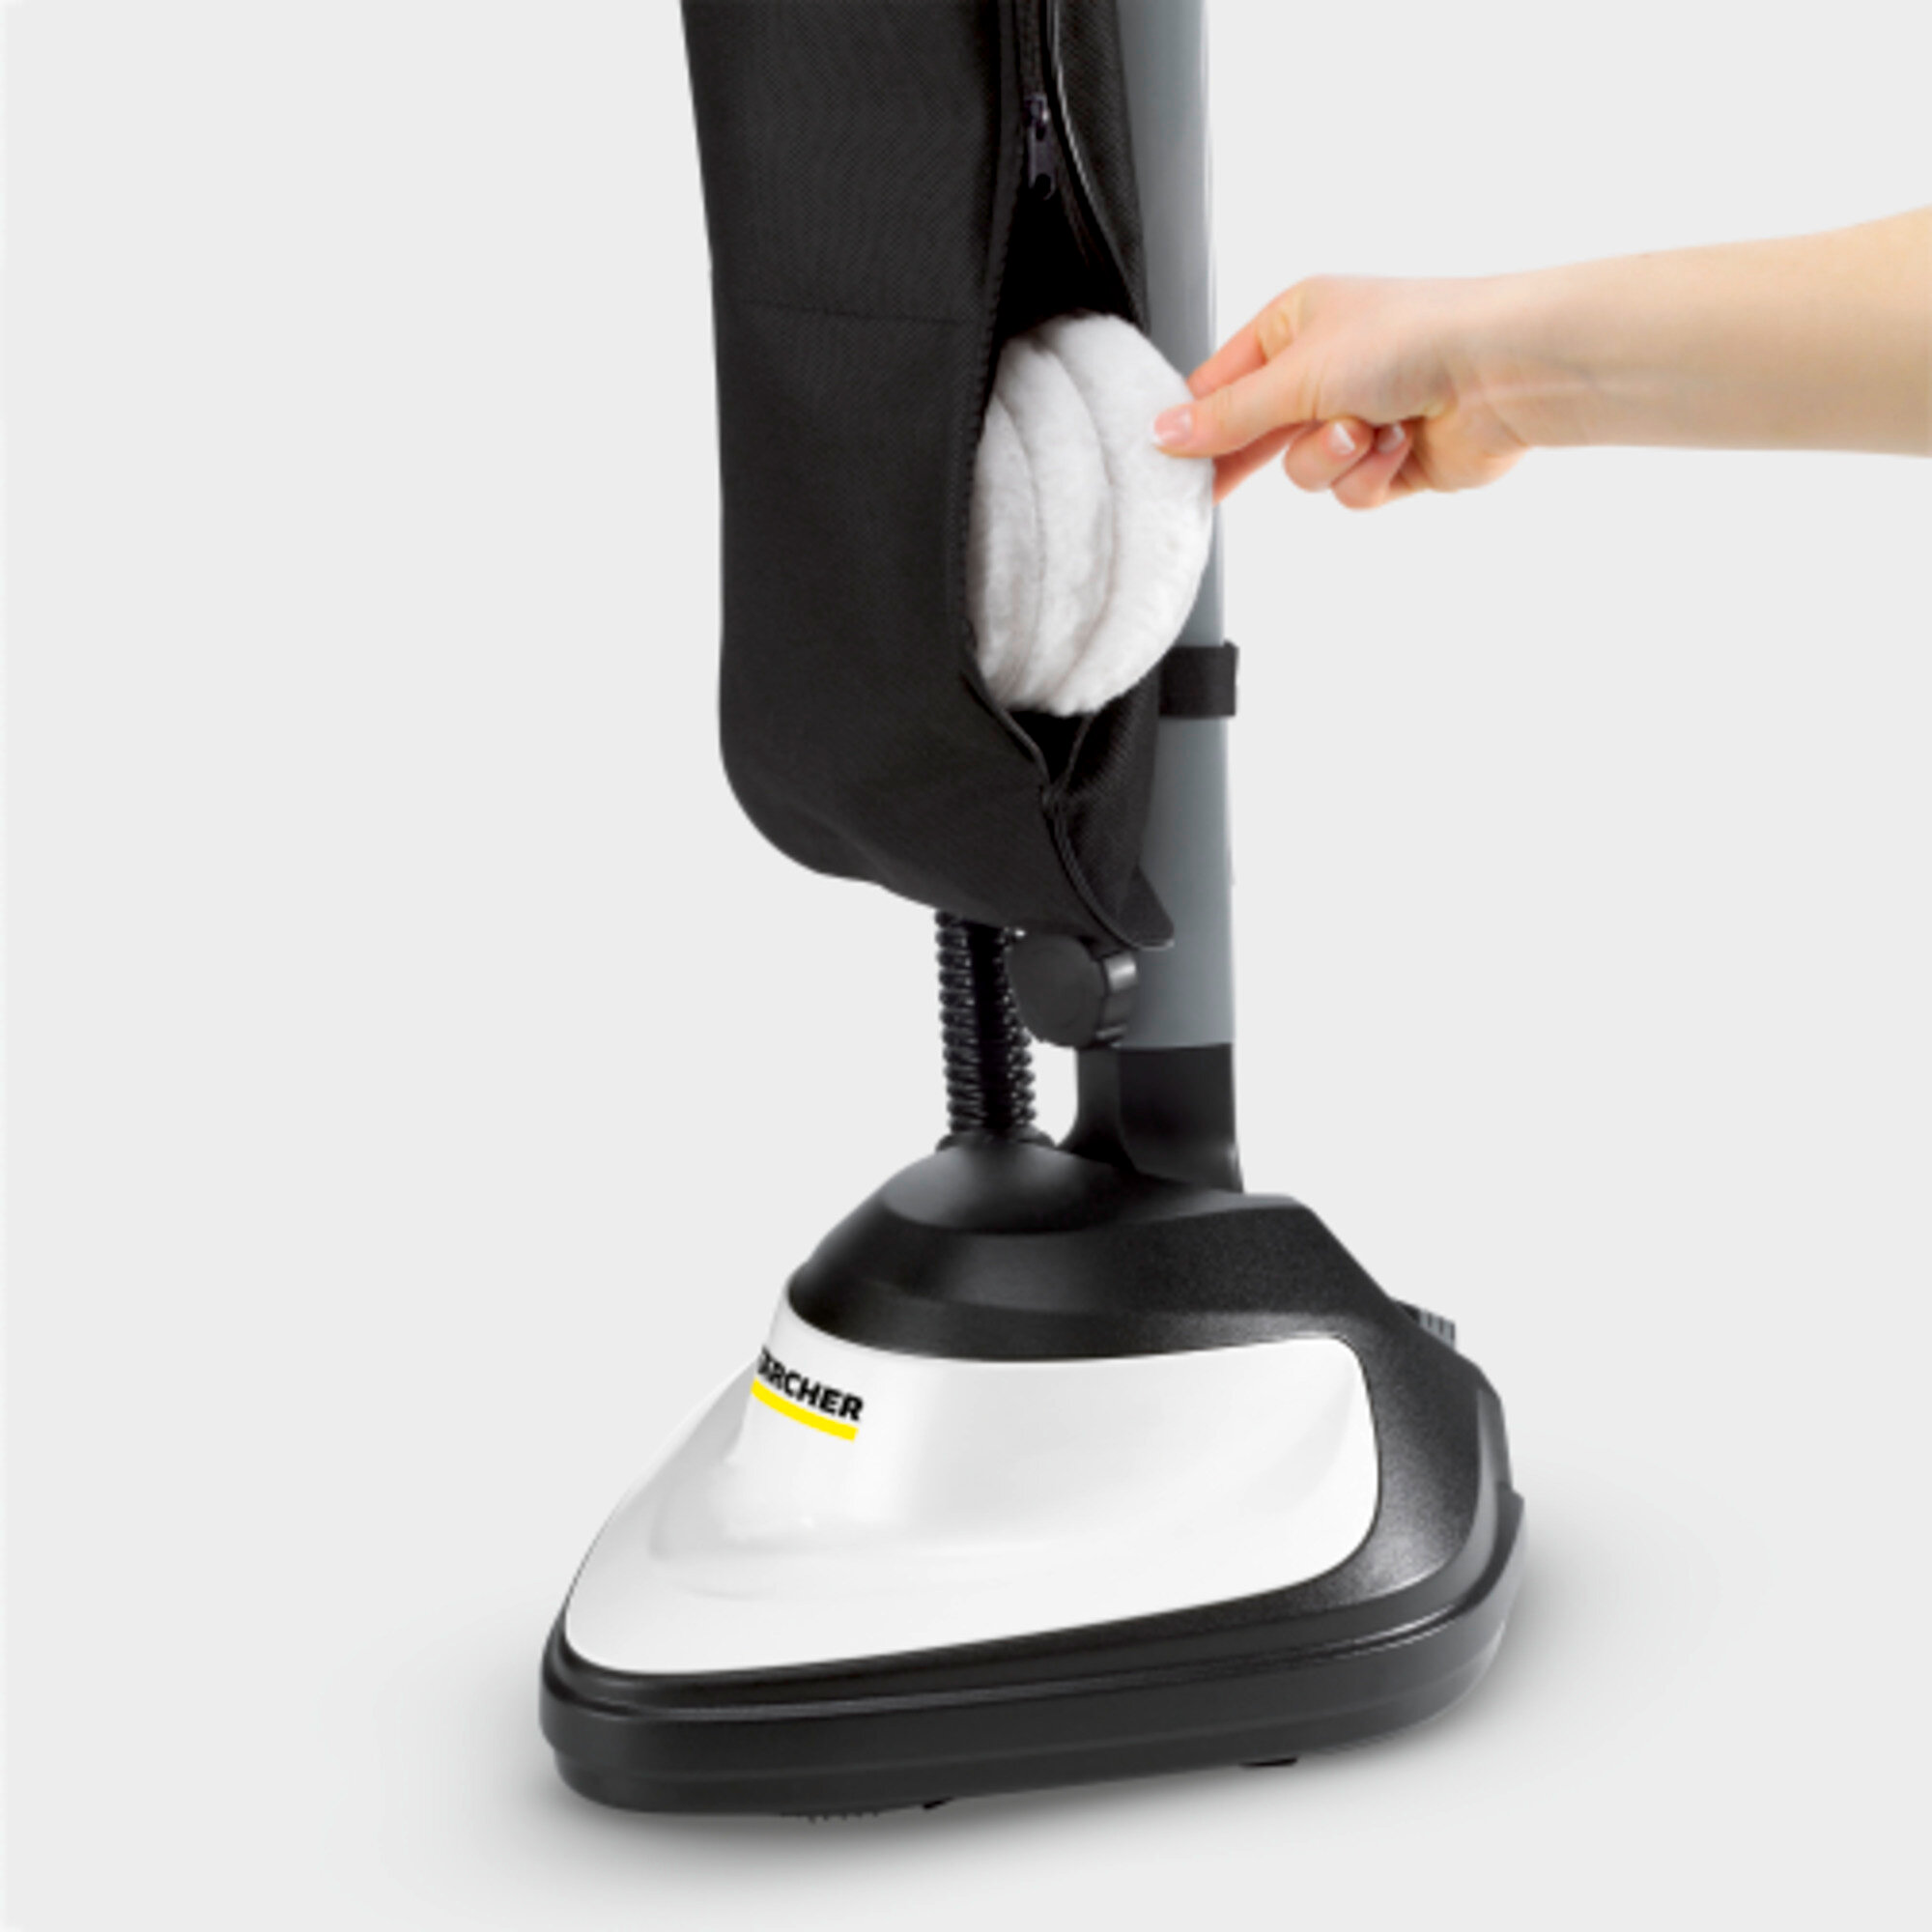 Floor polisher FP 303: High-quality textile bag, includes separate accessory compartment